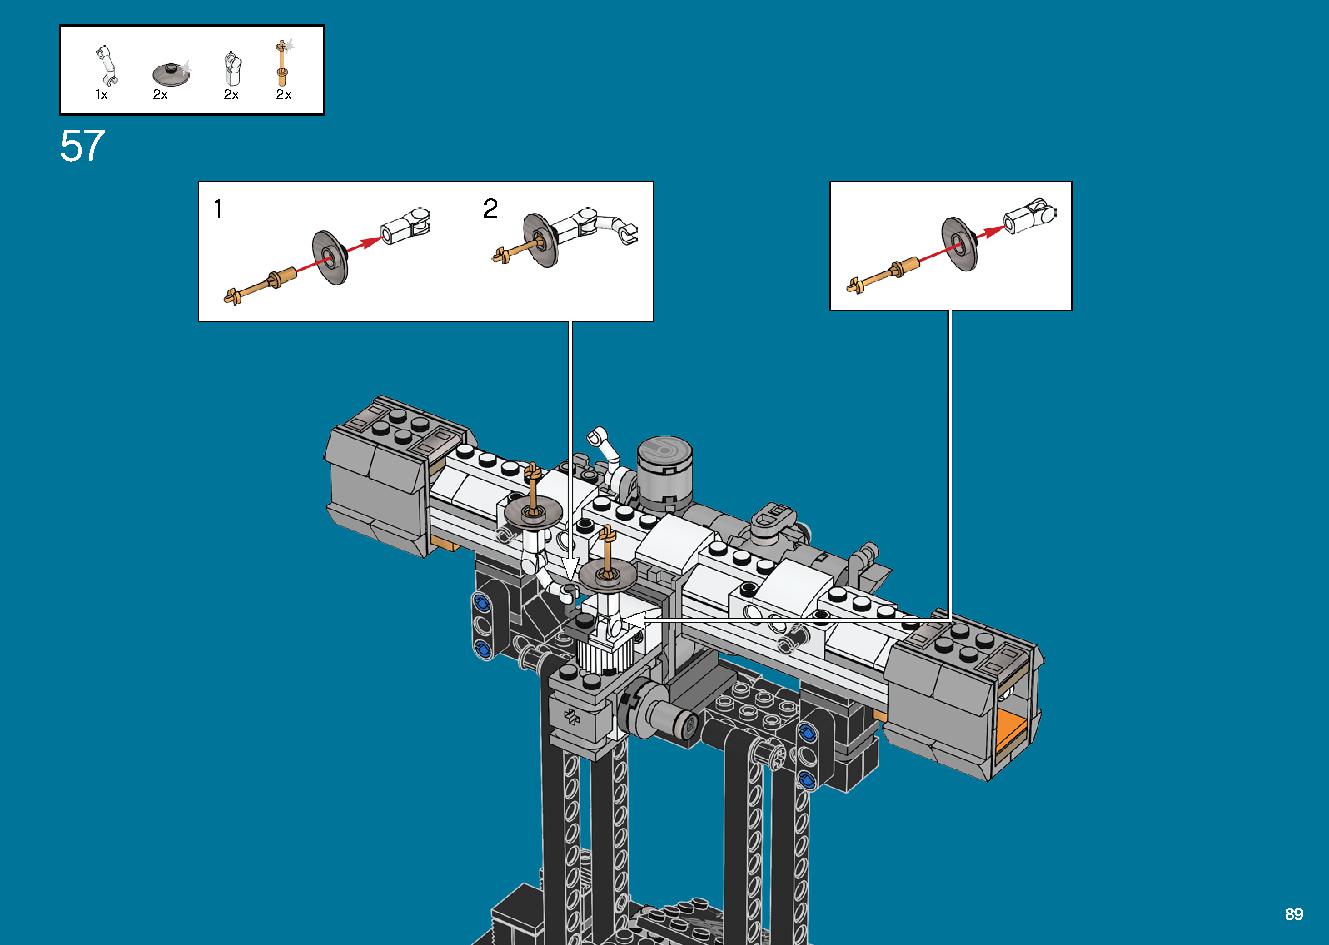 International Space Station 21321 LEGO information LEGO instructions 89 page